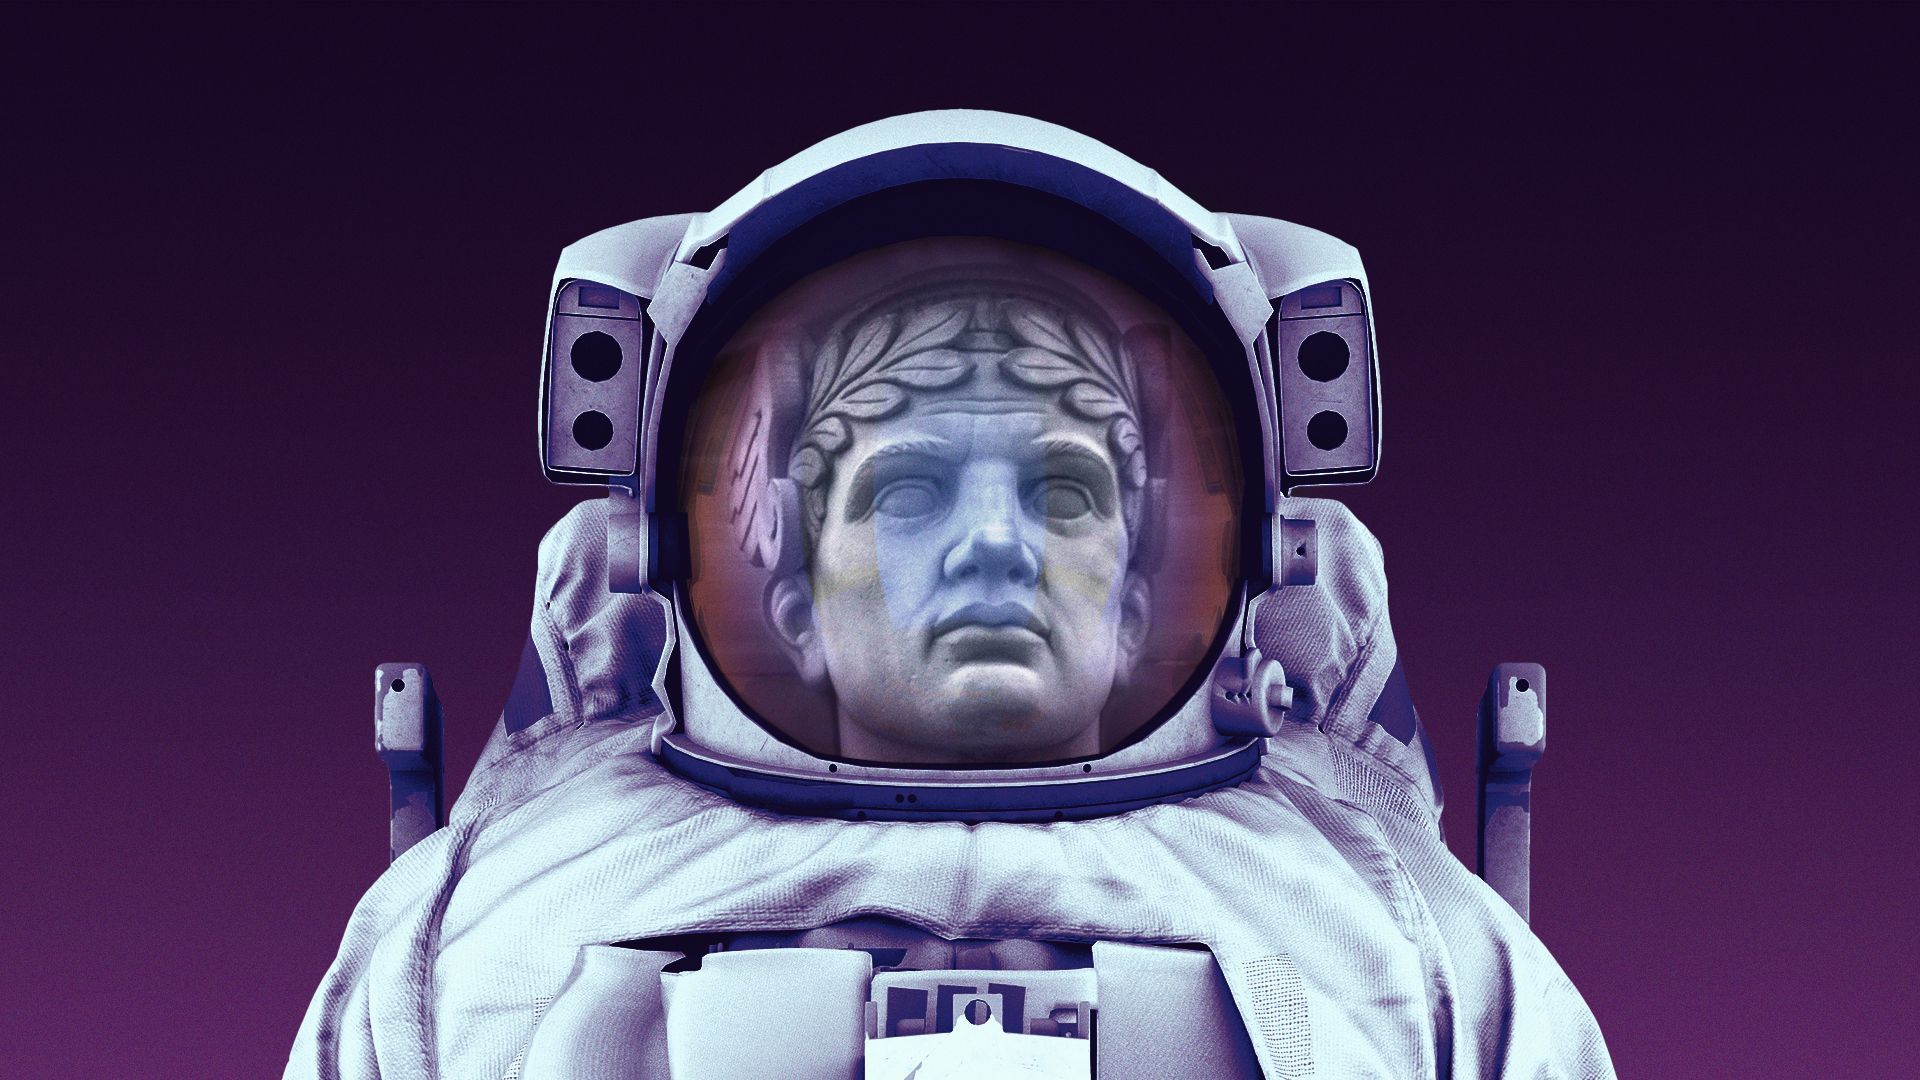 Illustration of Cleveland's Guardians of Traffic statue wearing an astronaut suit.